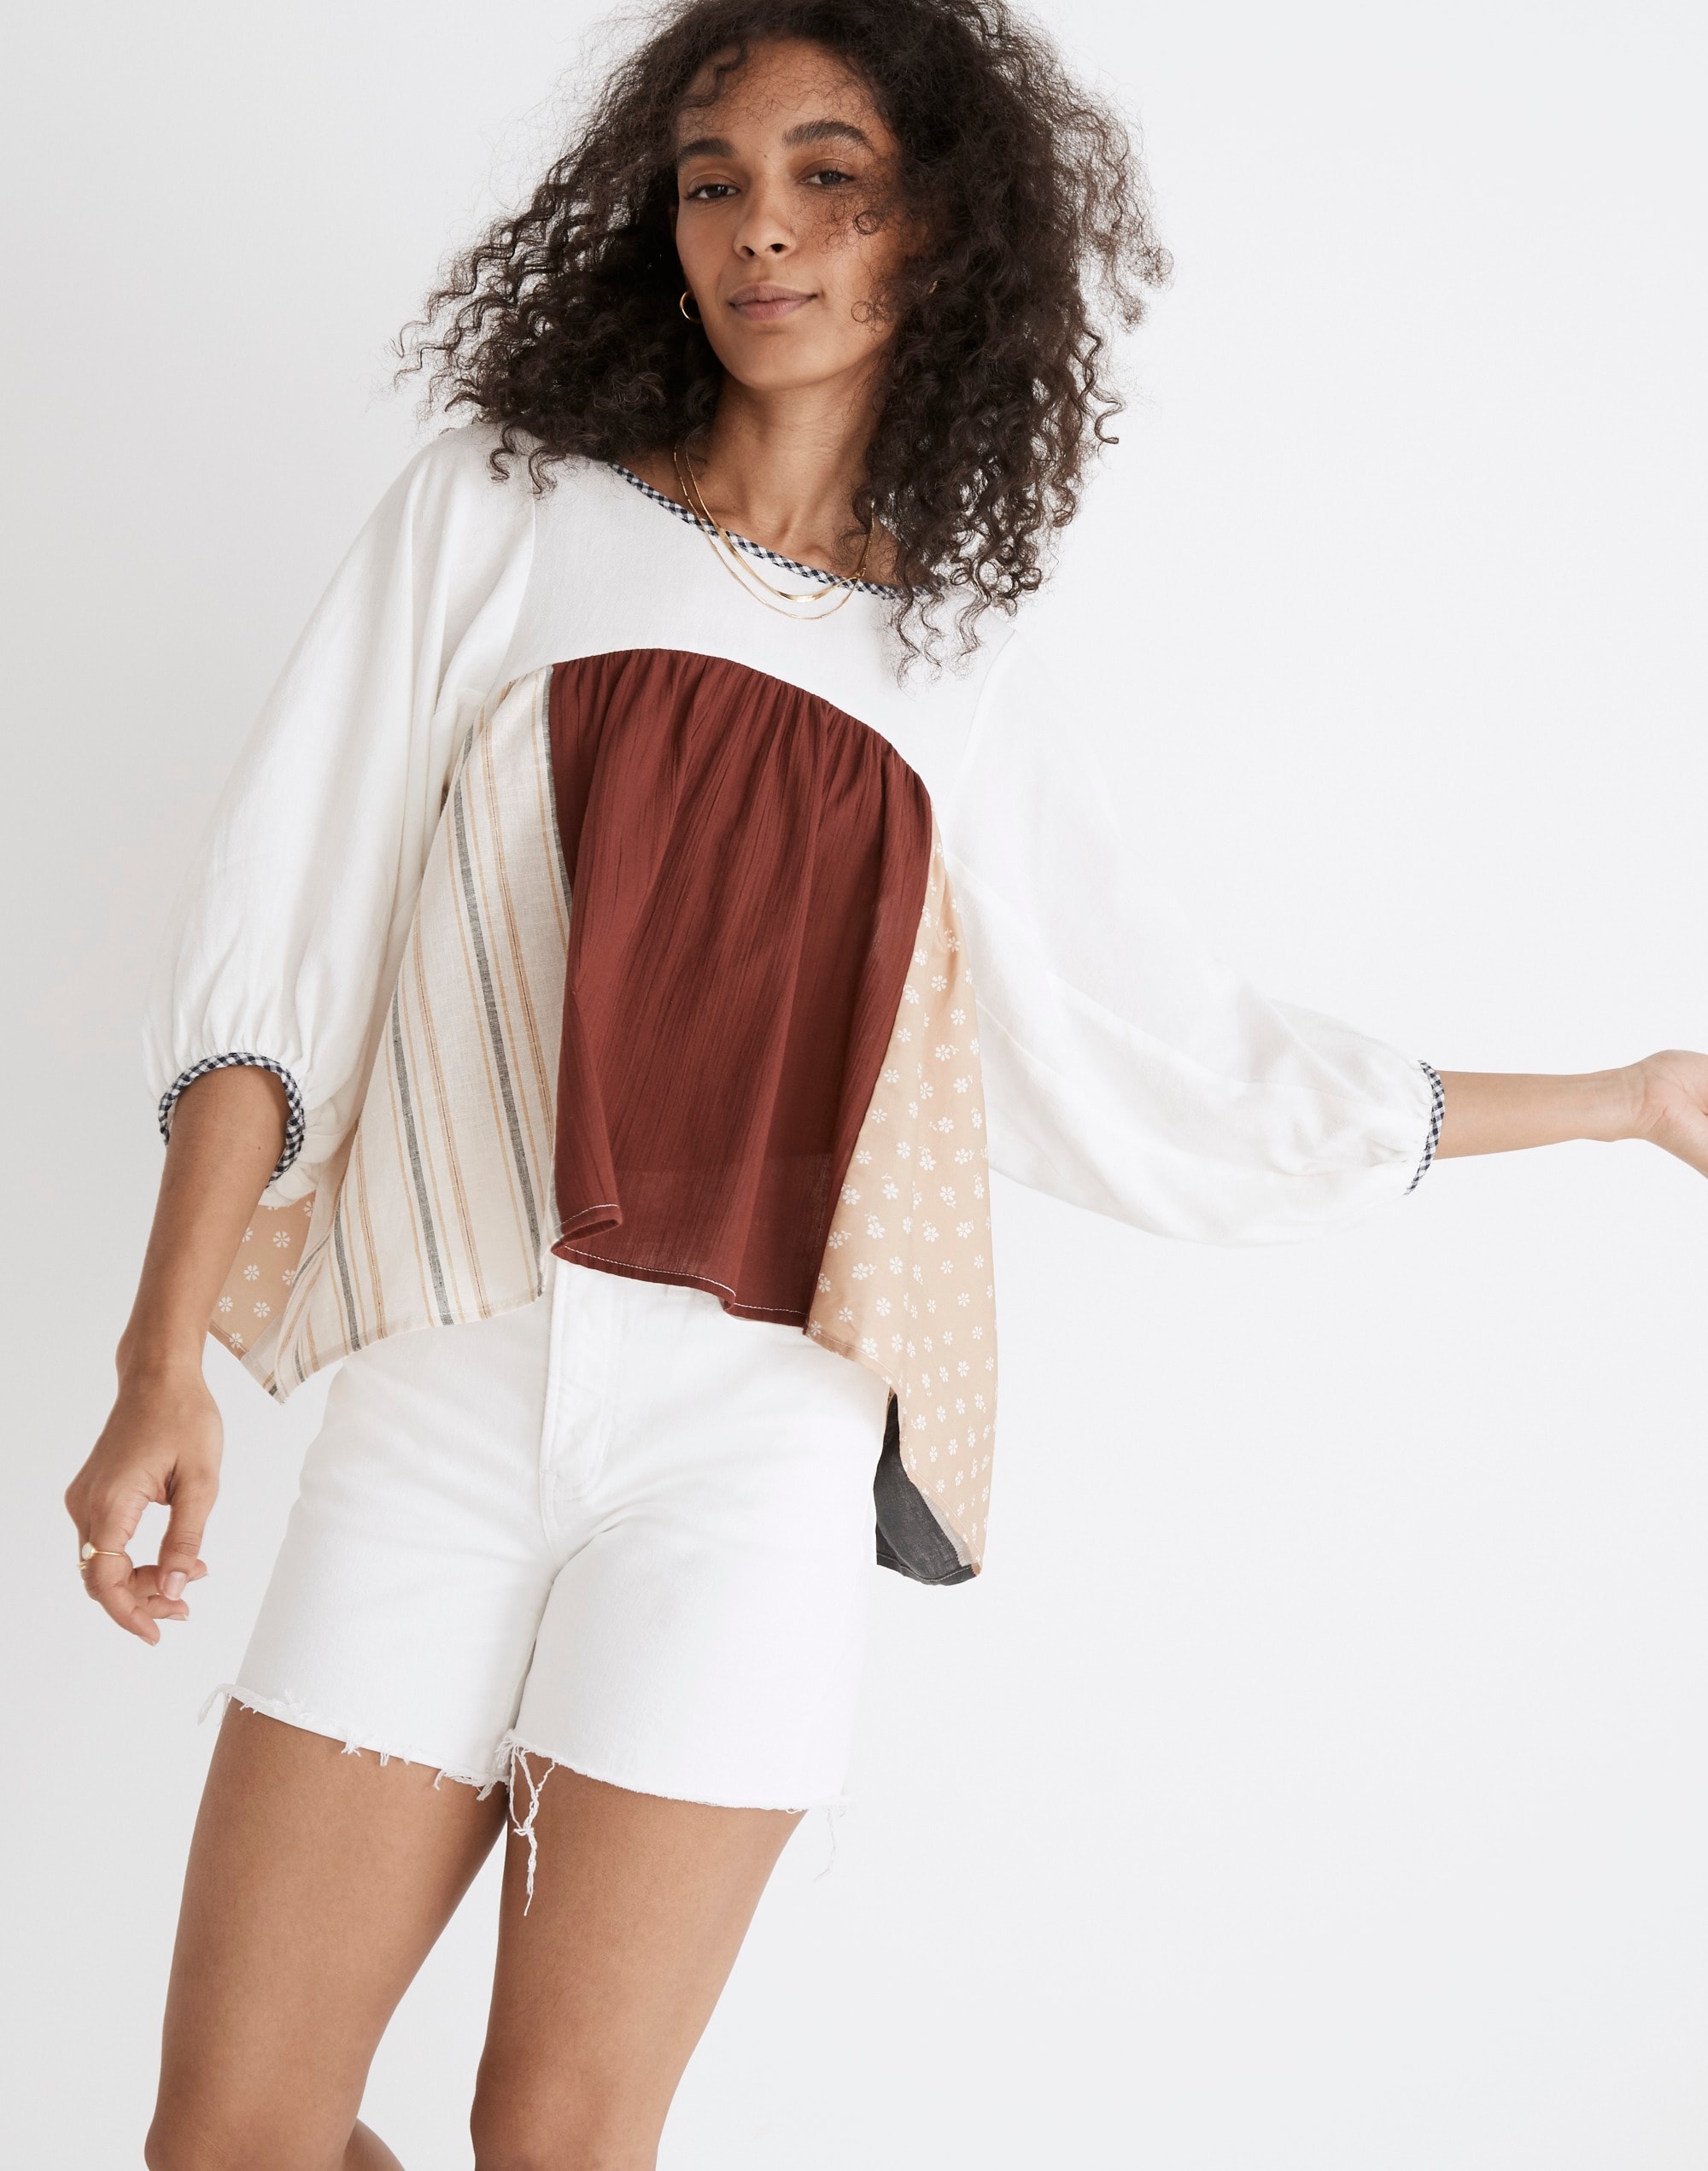 Madewell x La Réunion Upcycled Patchwork Peasant Shirt